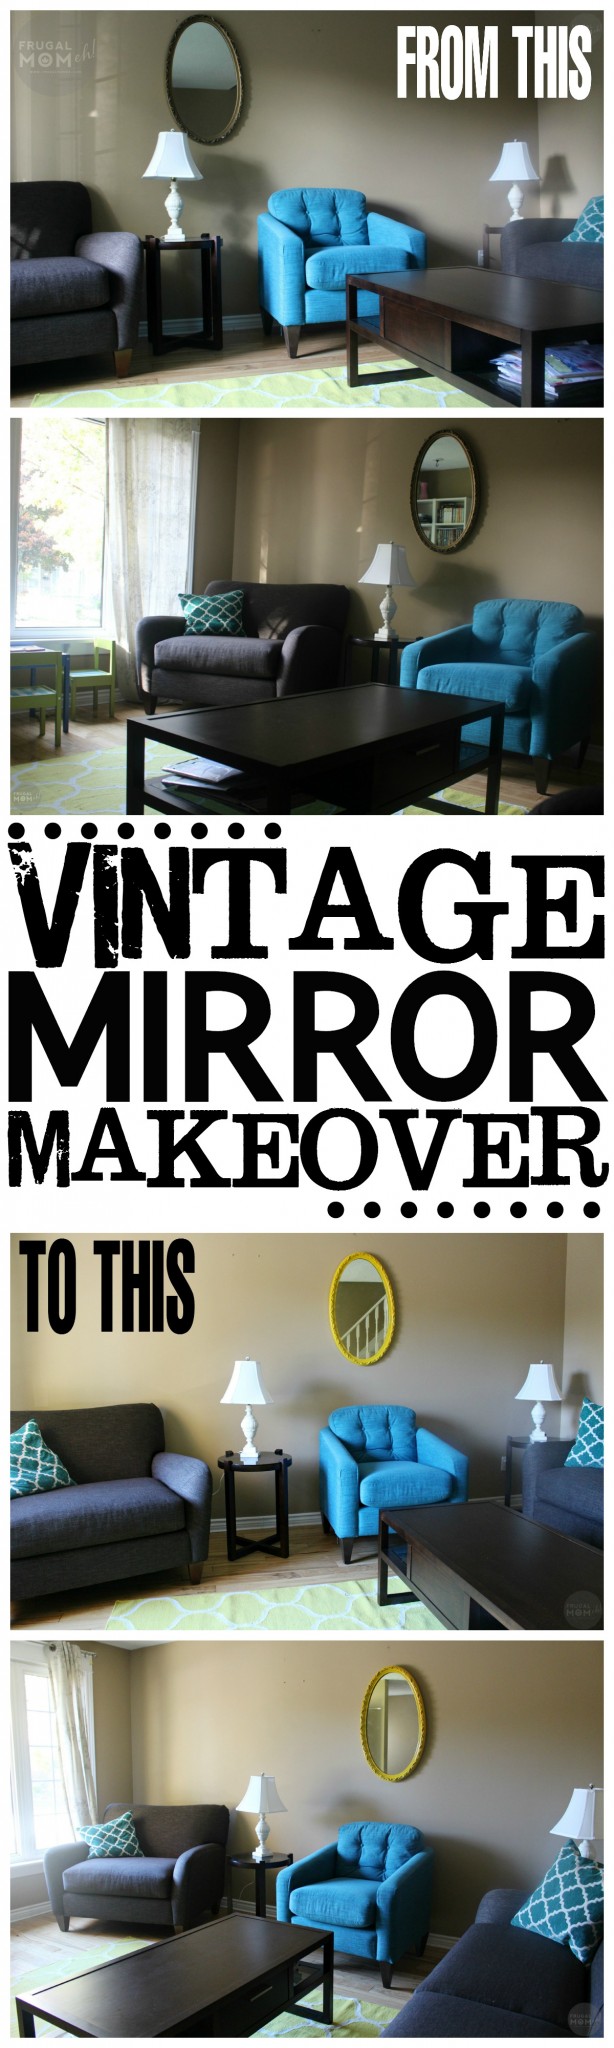 This Vintage Mirror Makeover is an easy DIY to take old pieces and make them new and modern looking!